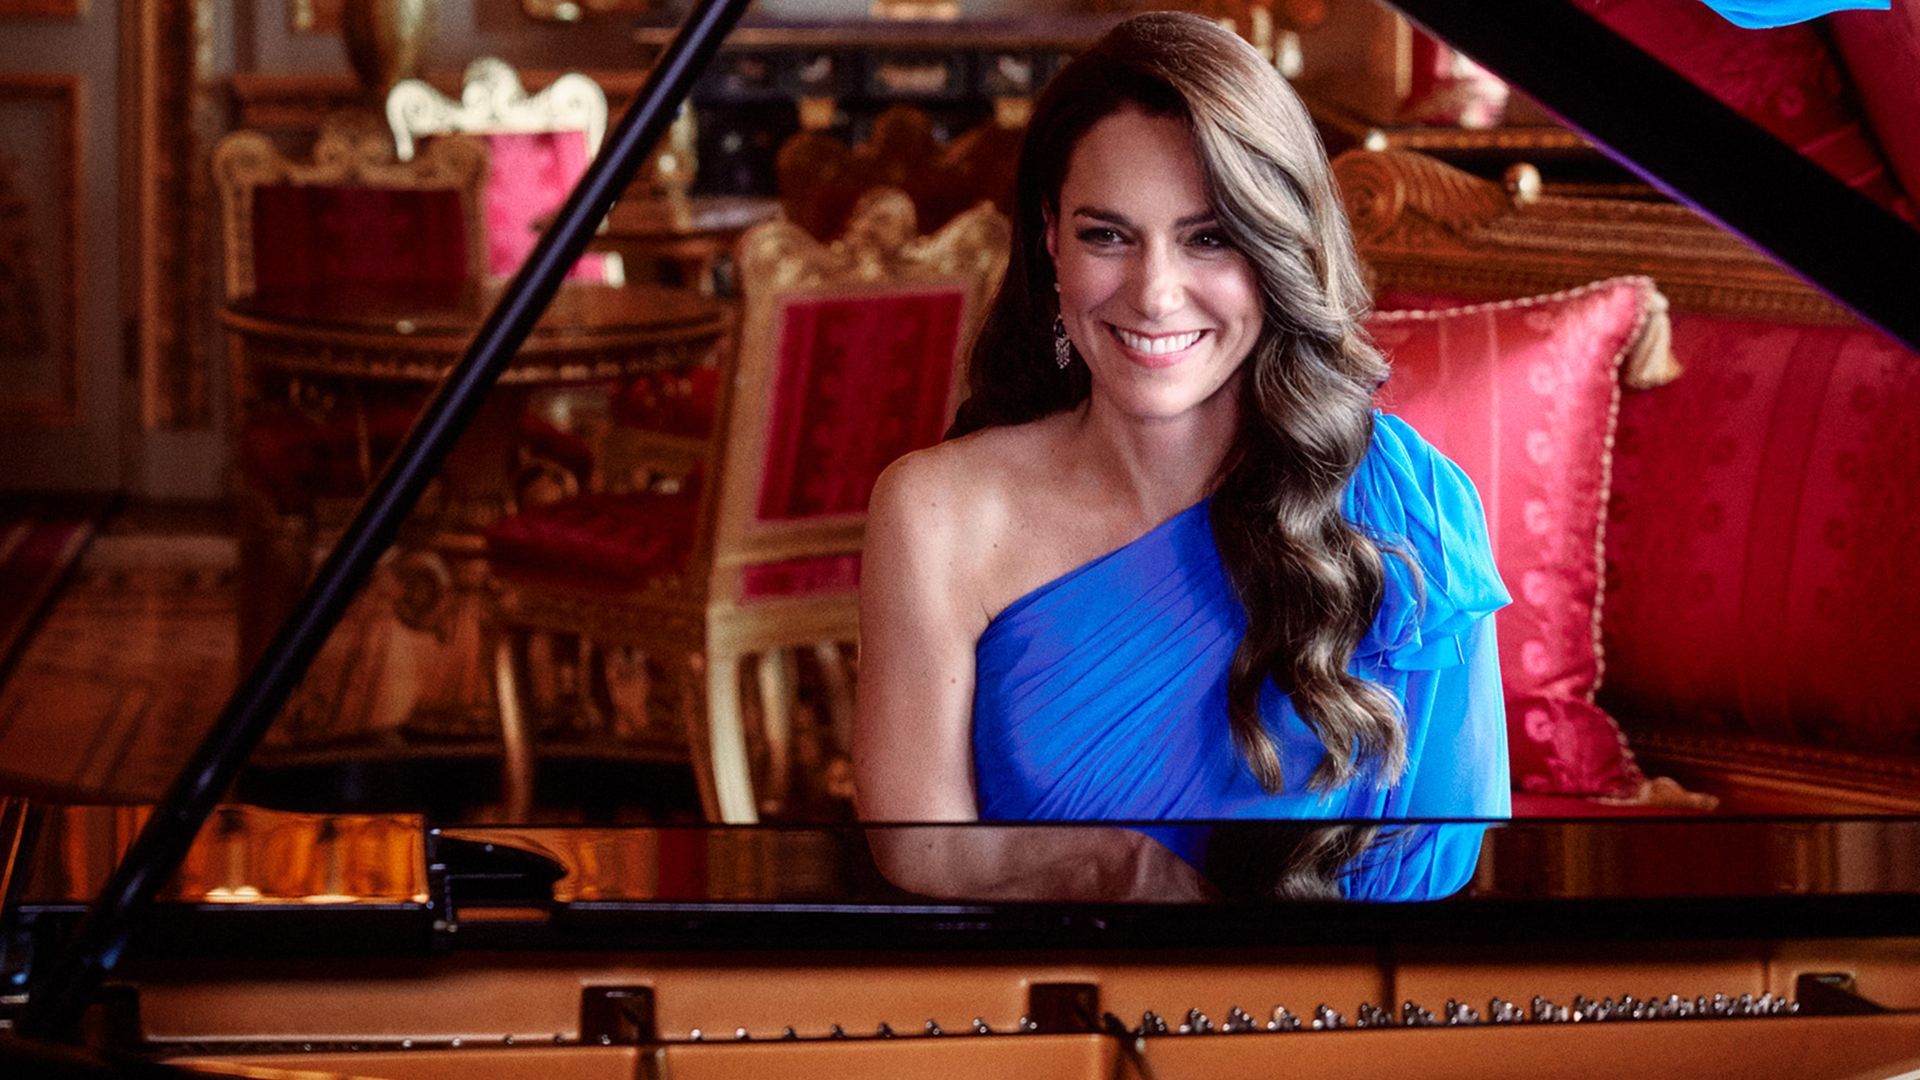 Princess Kate showcases incredible piano skills in unexpected Eurovision appearance thumbnail